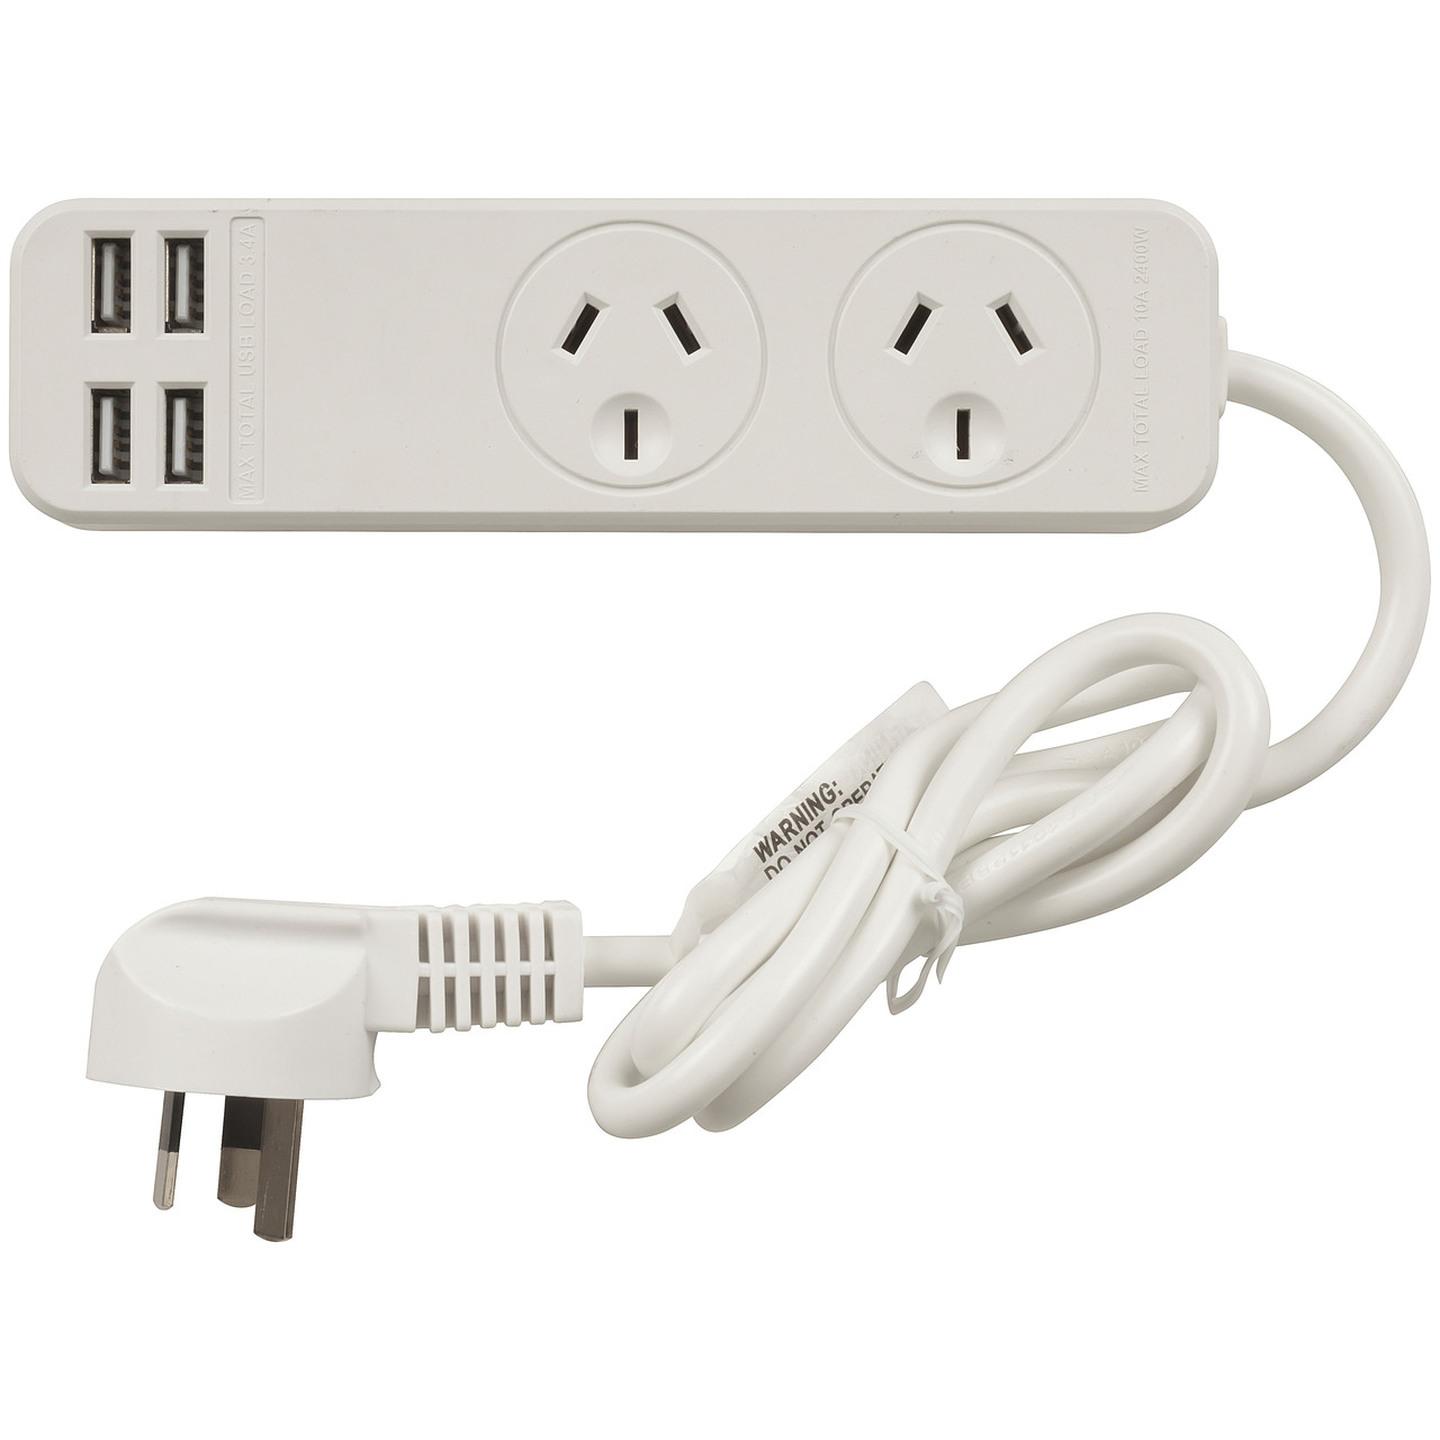 2 Way Powerboard with USB Charge Ports